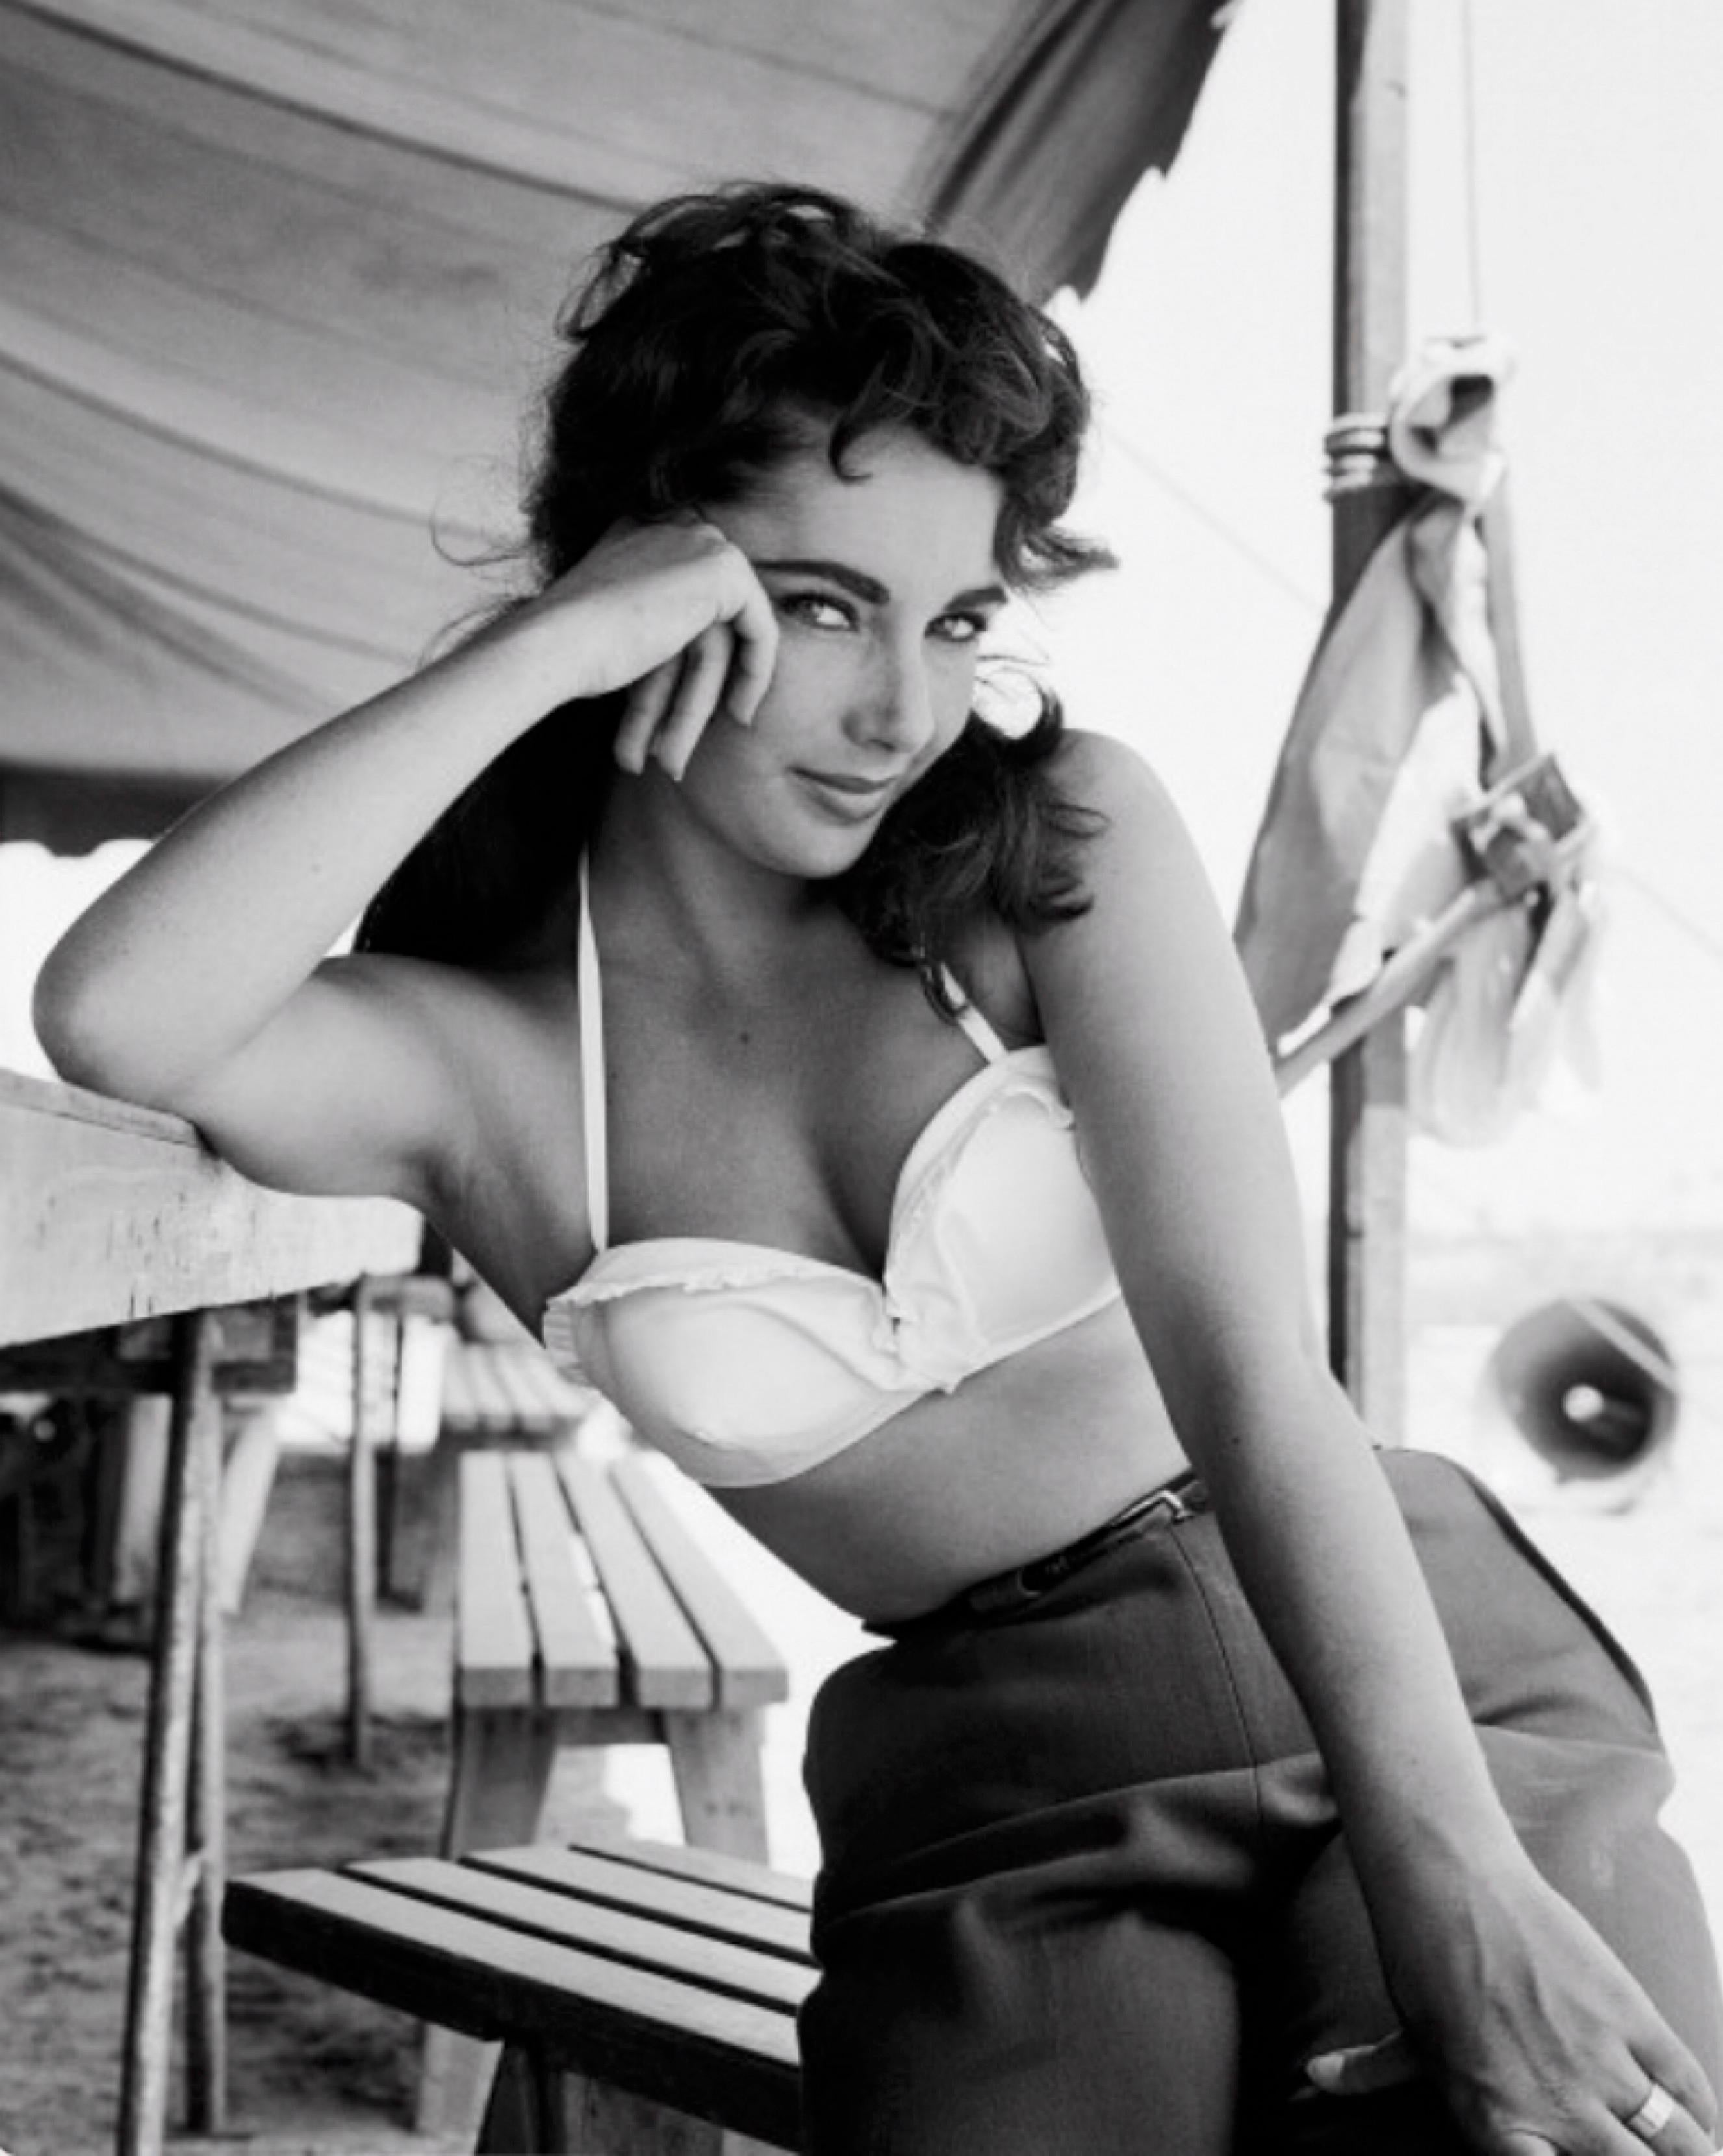 Unknown Color Photograph - Elizabeth Taylor on the Set of "Giant" -  Oversize Print 